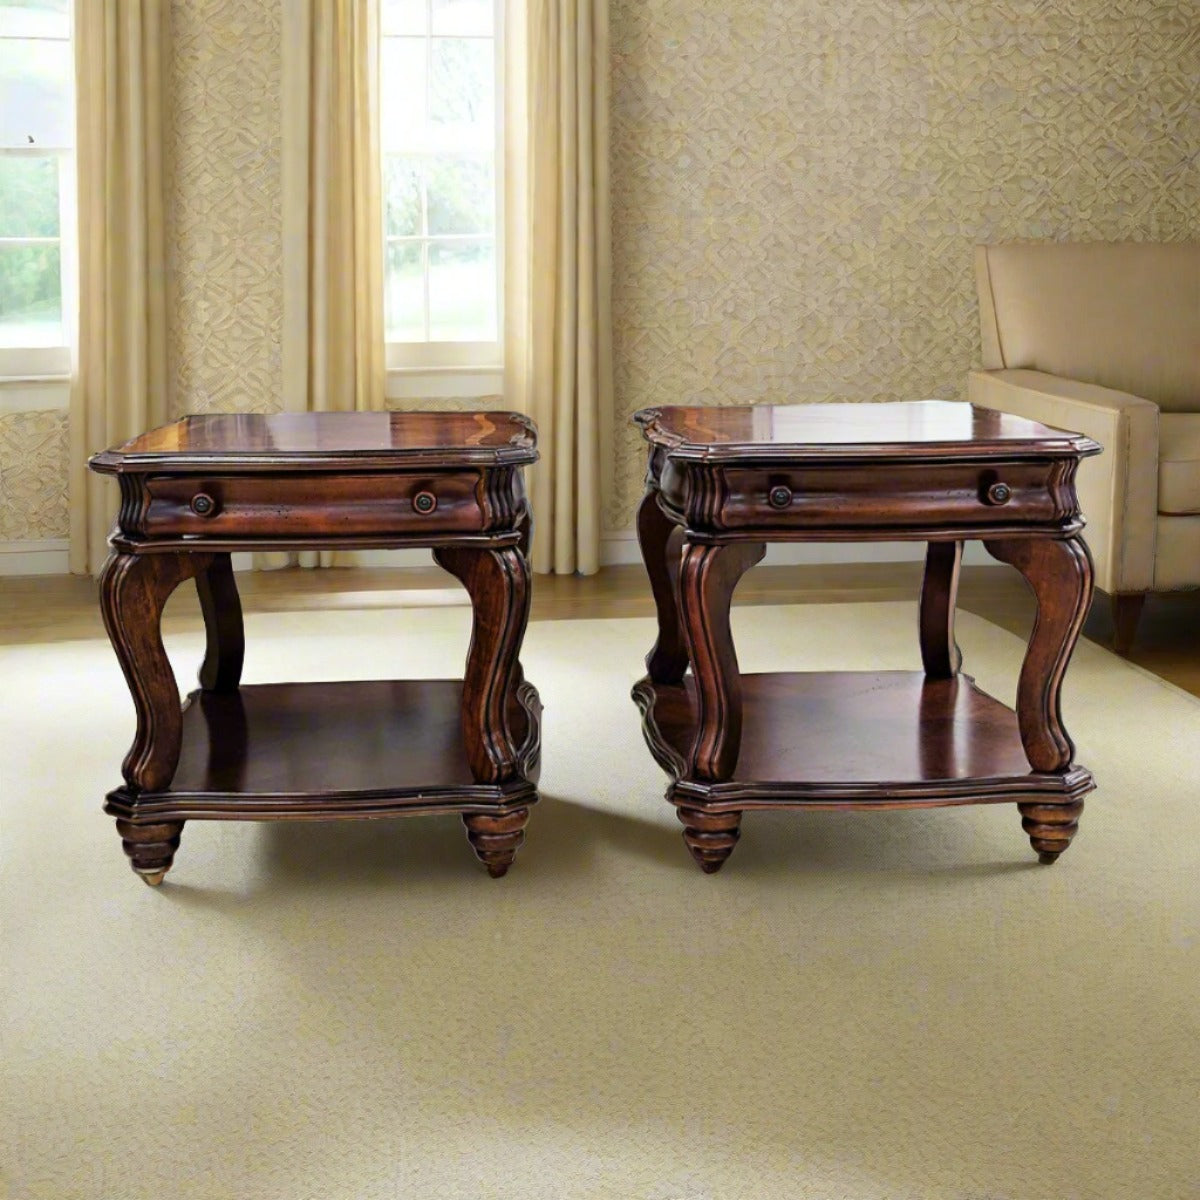 SET 3 American Signature Tables (Sold Separately) - Habroc - Online ReStore